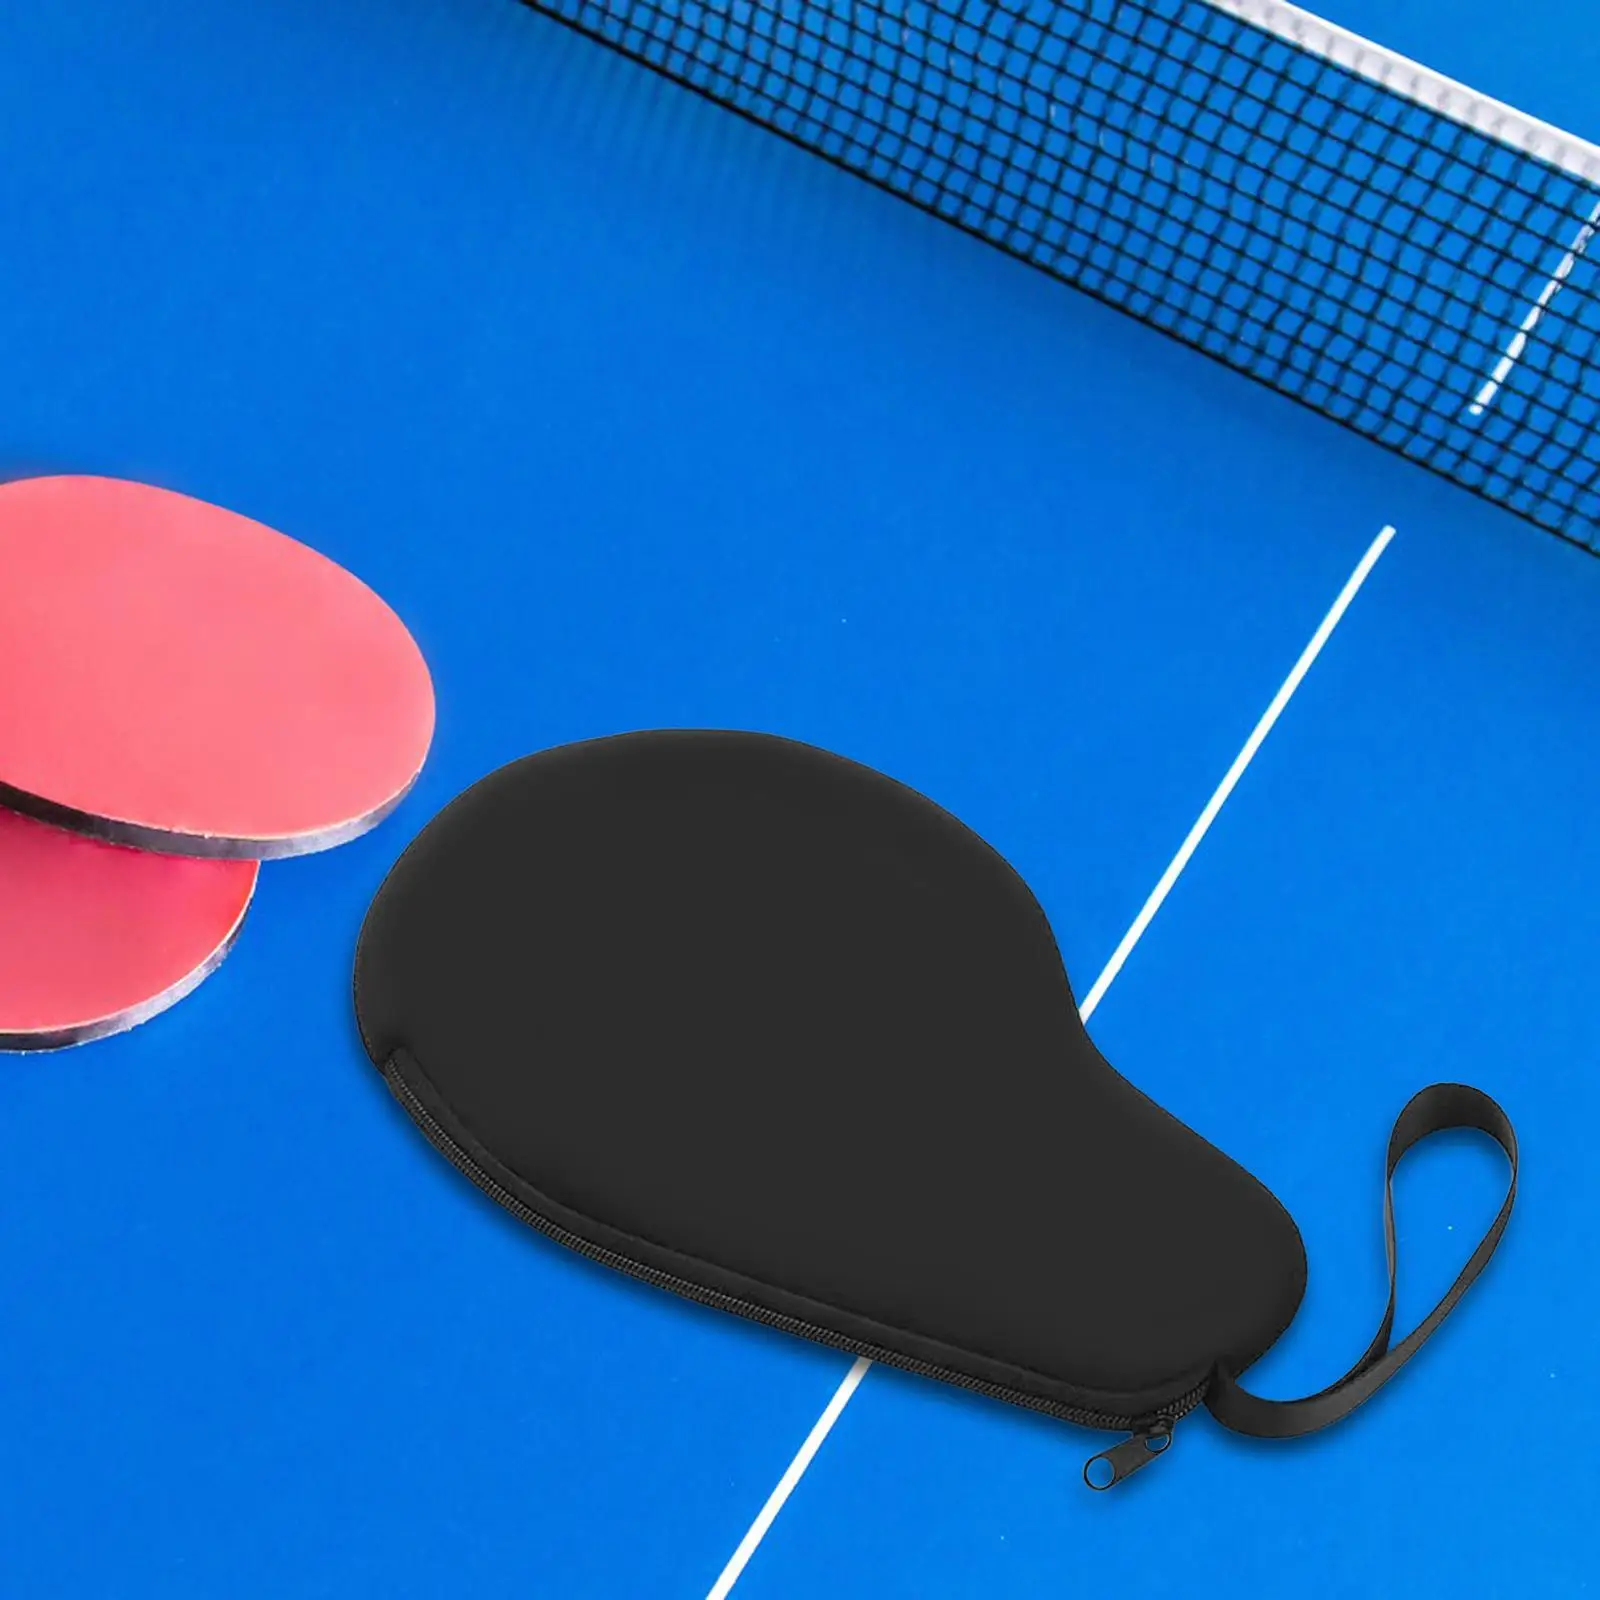 Ping Pong Paddle Case Shock Resistant Lightweight Protective Table Tennis Racket Bag for Youth Sportsman Competition Home